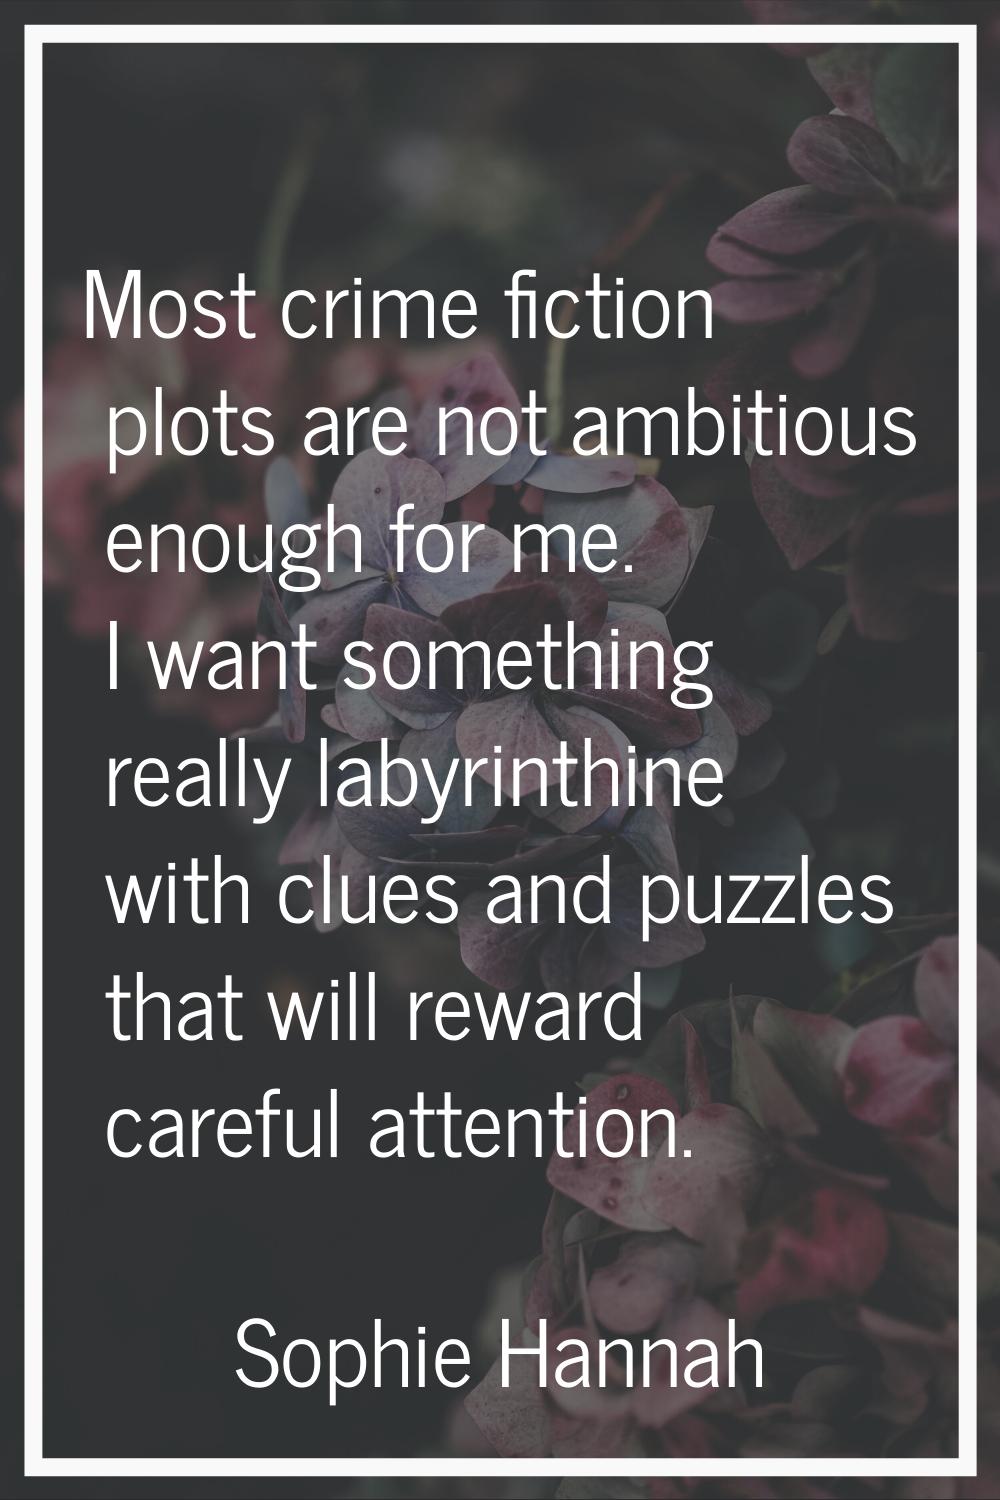 Most crime fiction plots are not ambitious enough for me. I want something really labyrinthine with